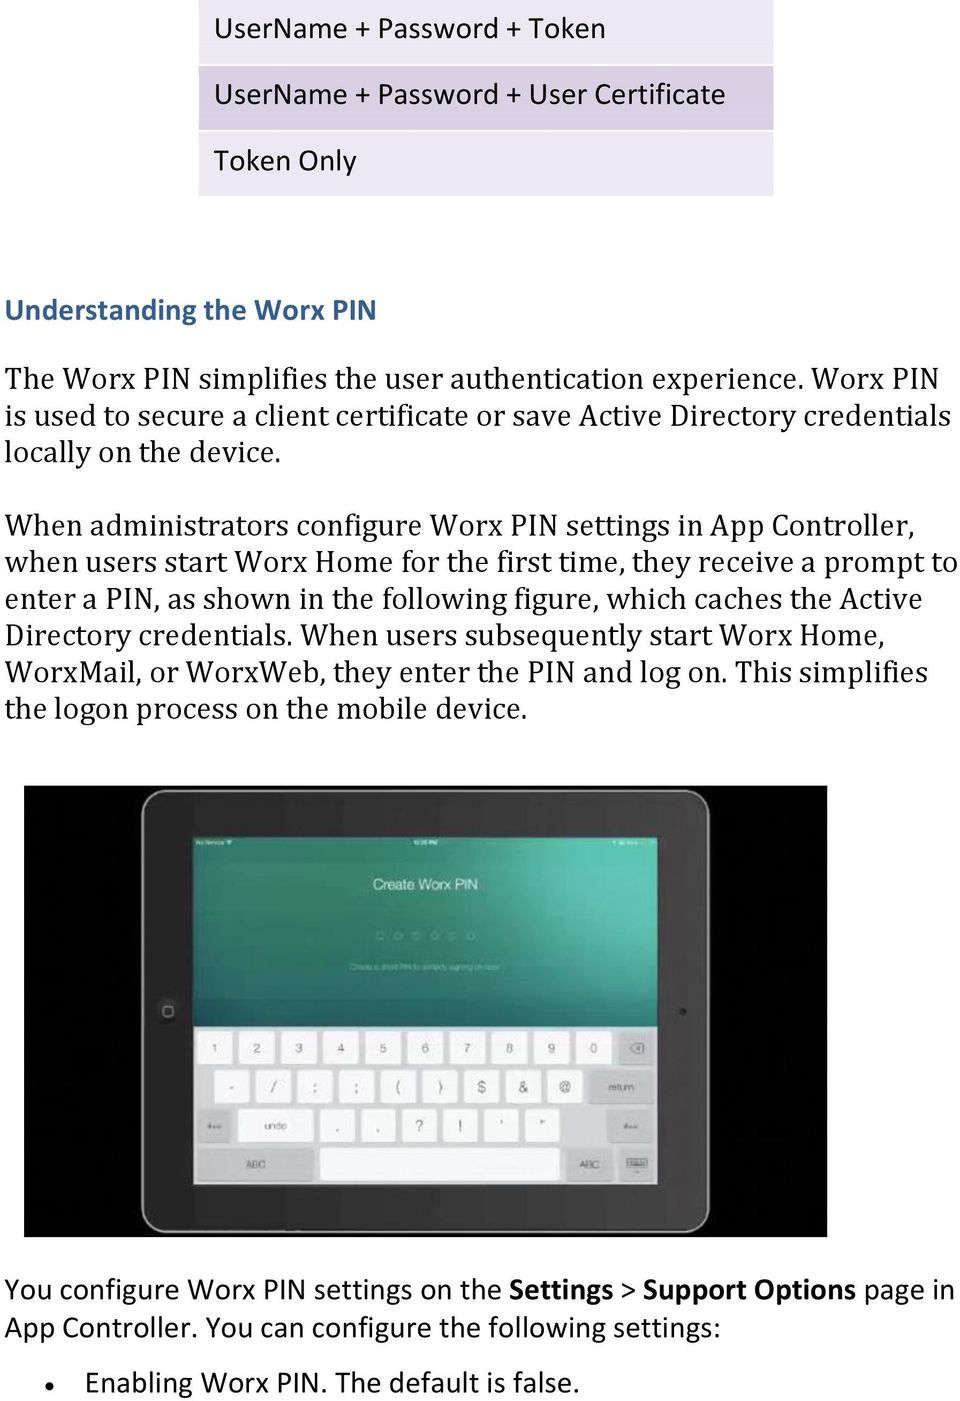 When administrators configure Worx PIN settings in App Controller, when users start Worx Home for the first time, they receive a prompt to enter a PIN, as shown in the following figure, which caches